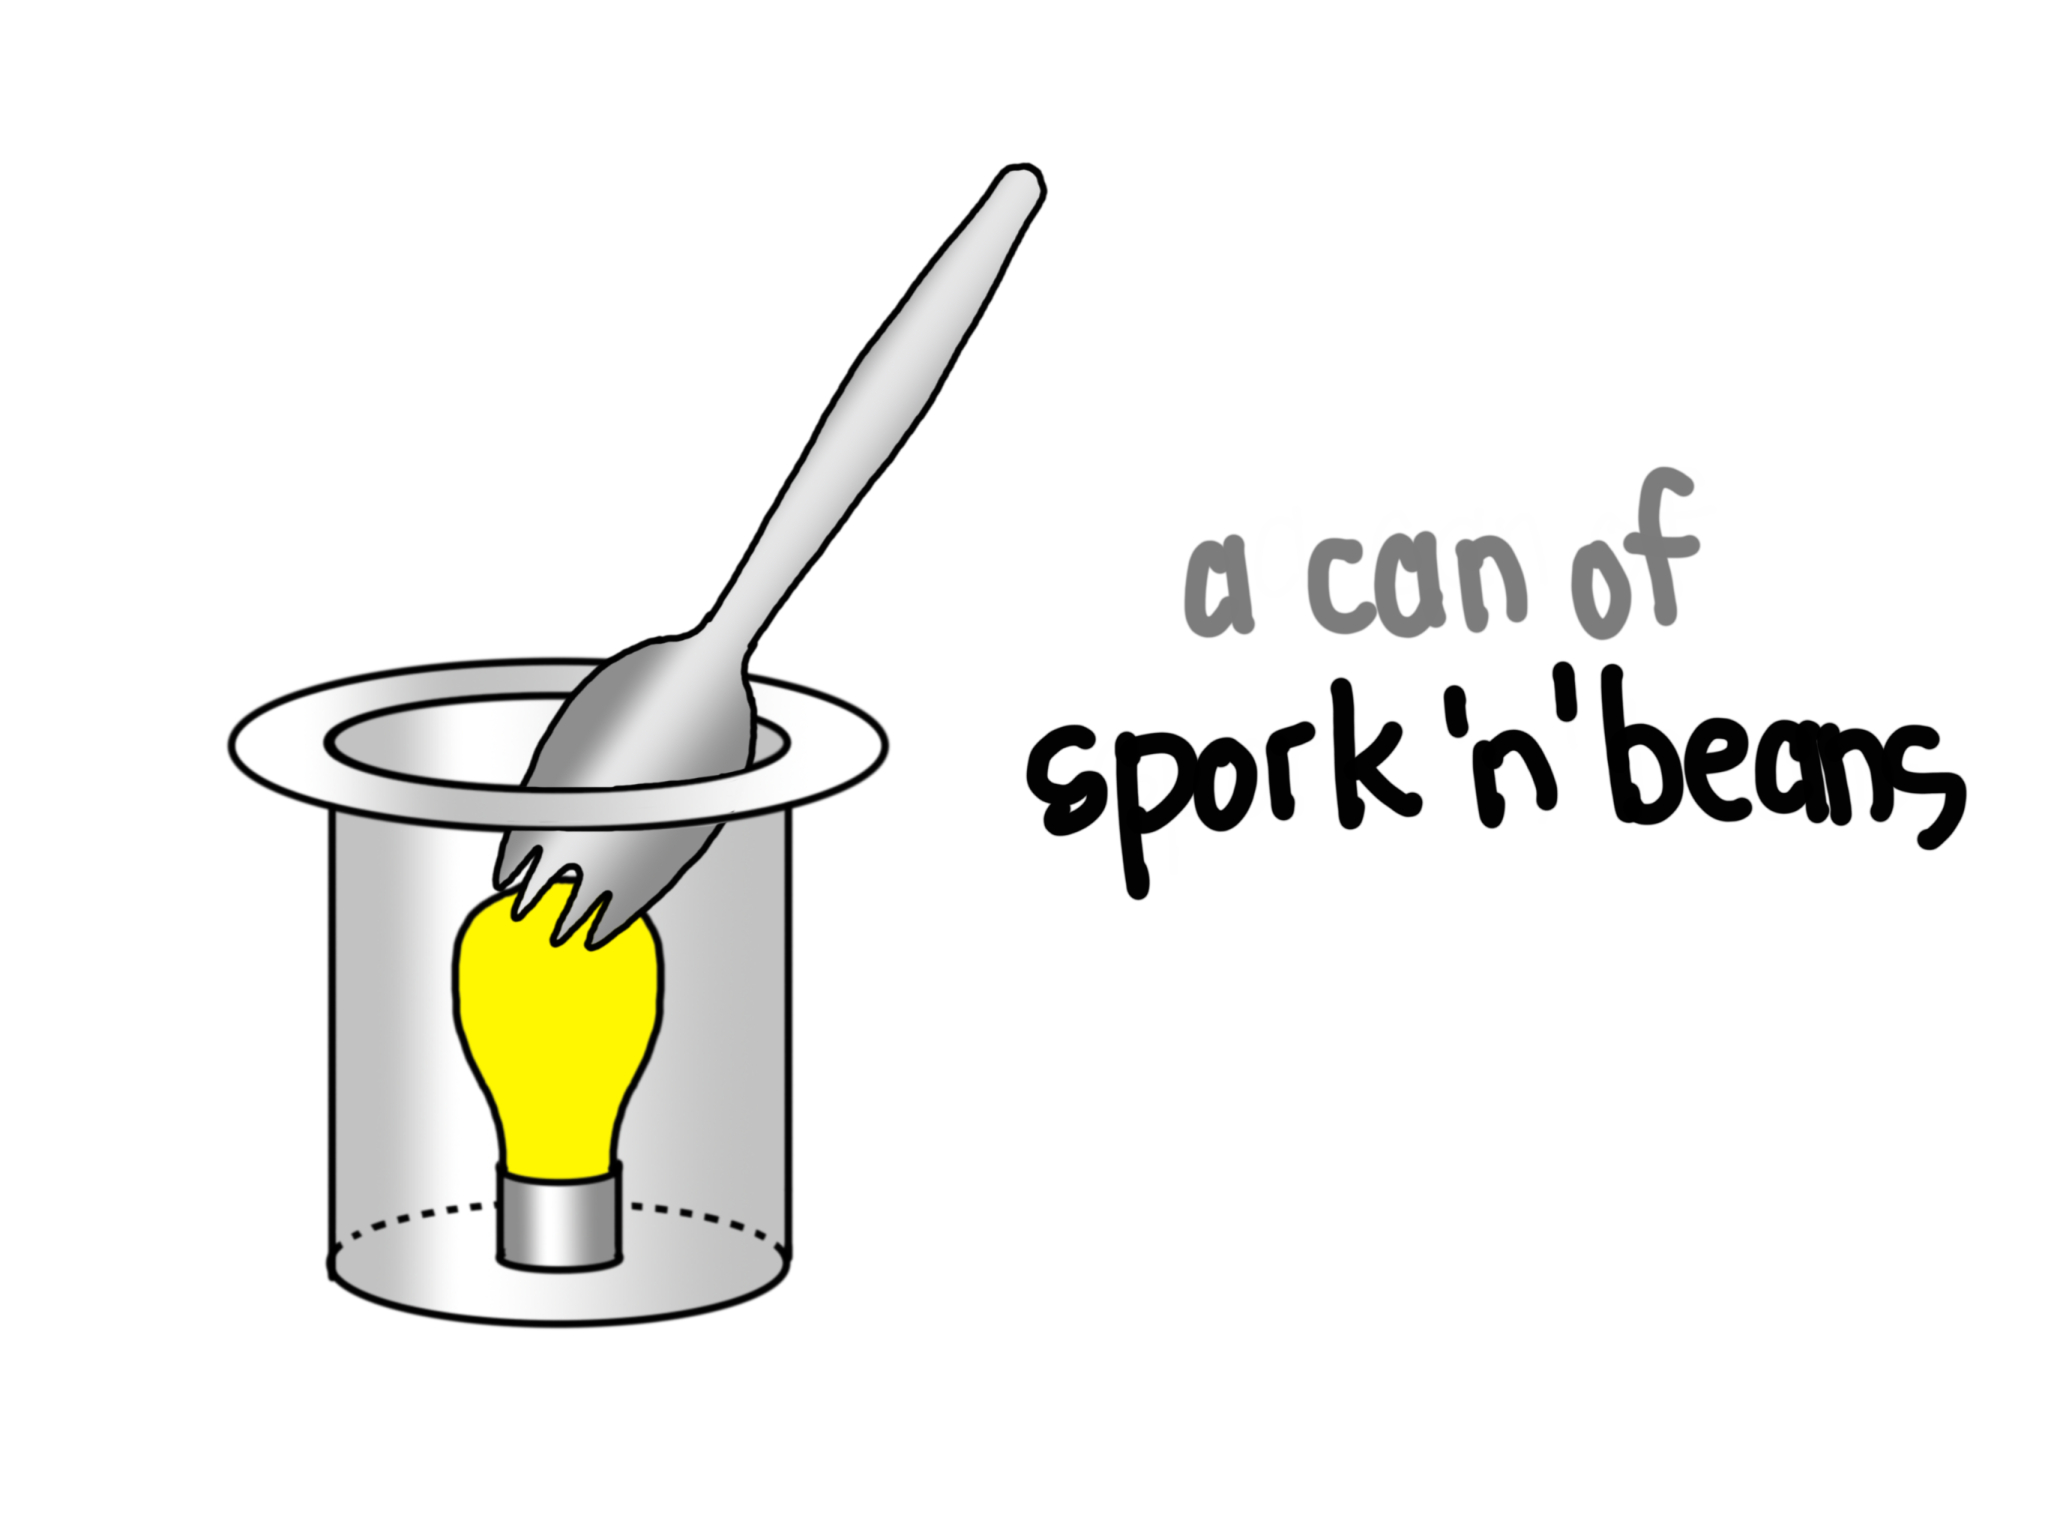 An illustration of an upside down canned lighting with bulb with a spork sticking out of it, labelled "a can of spork'n'beans"